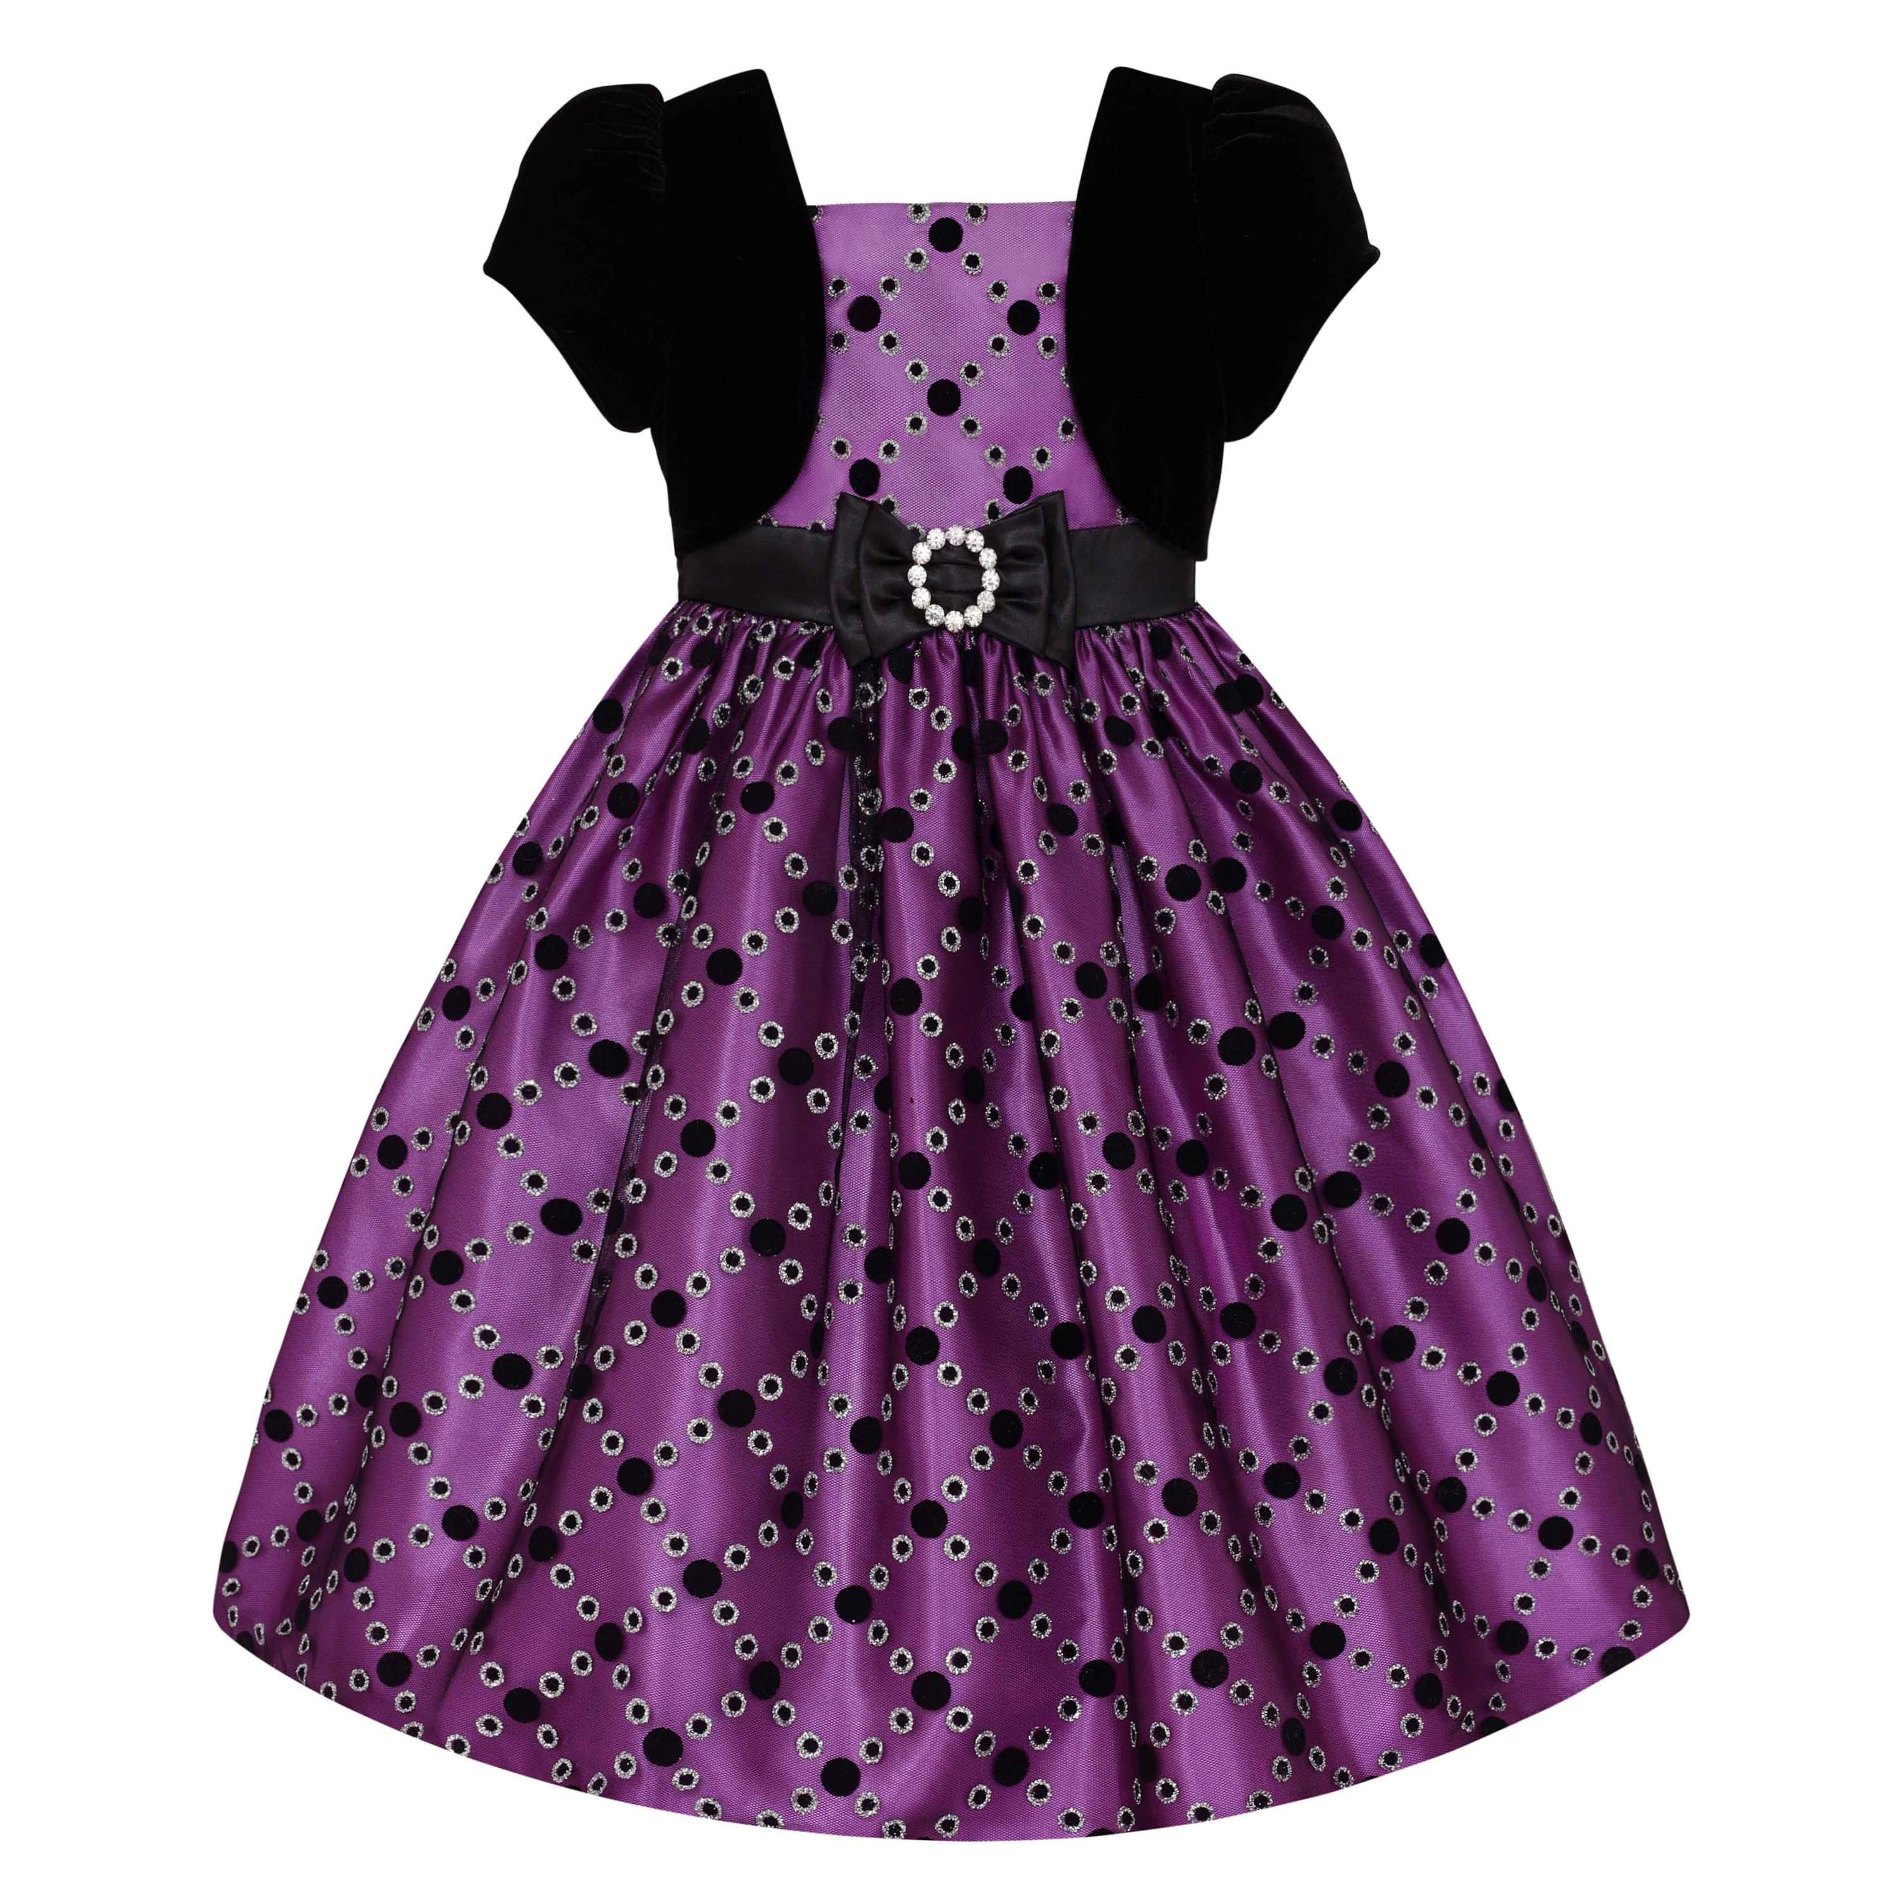 Love Girl's Layered-Look Party Dress - Dot Print